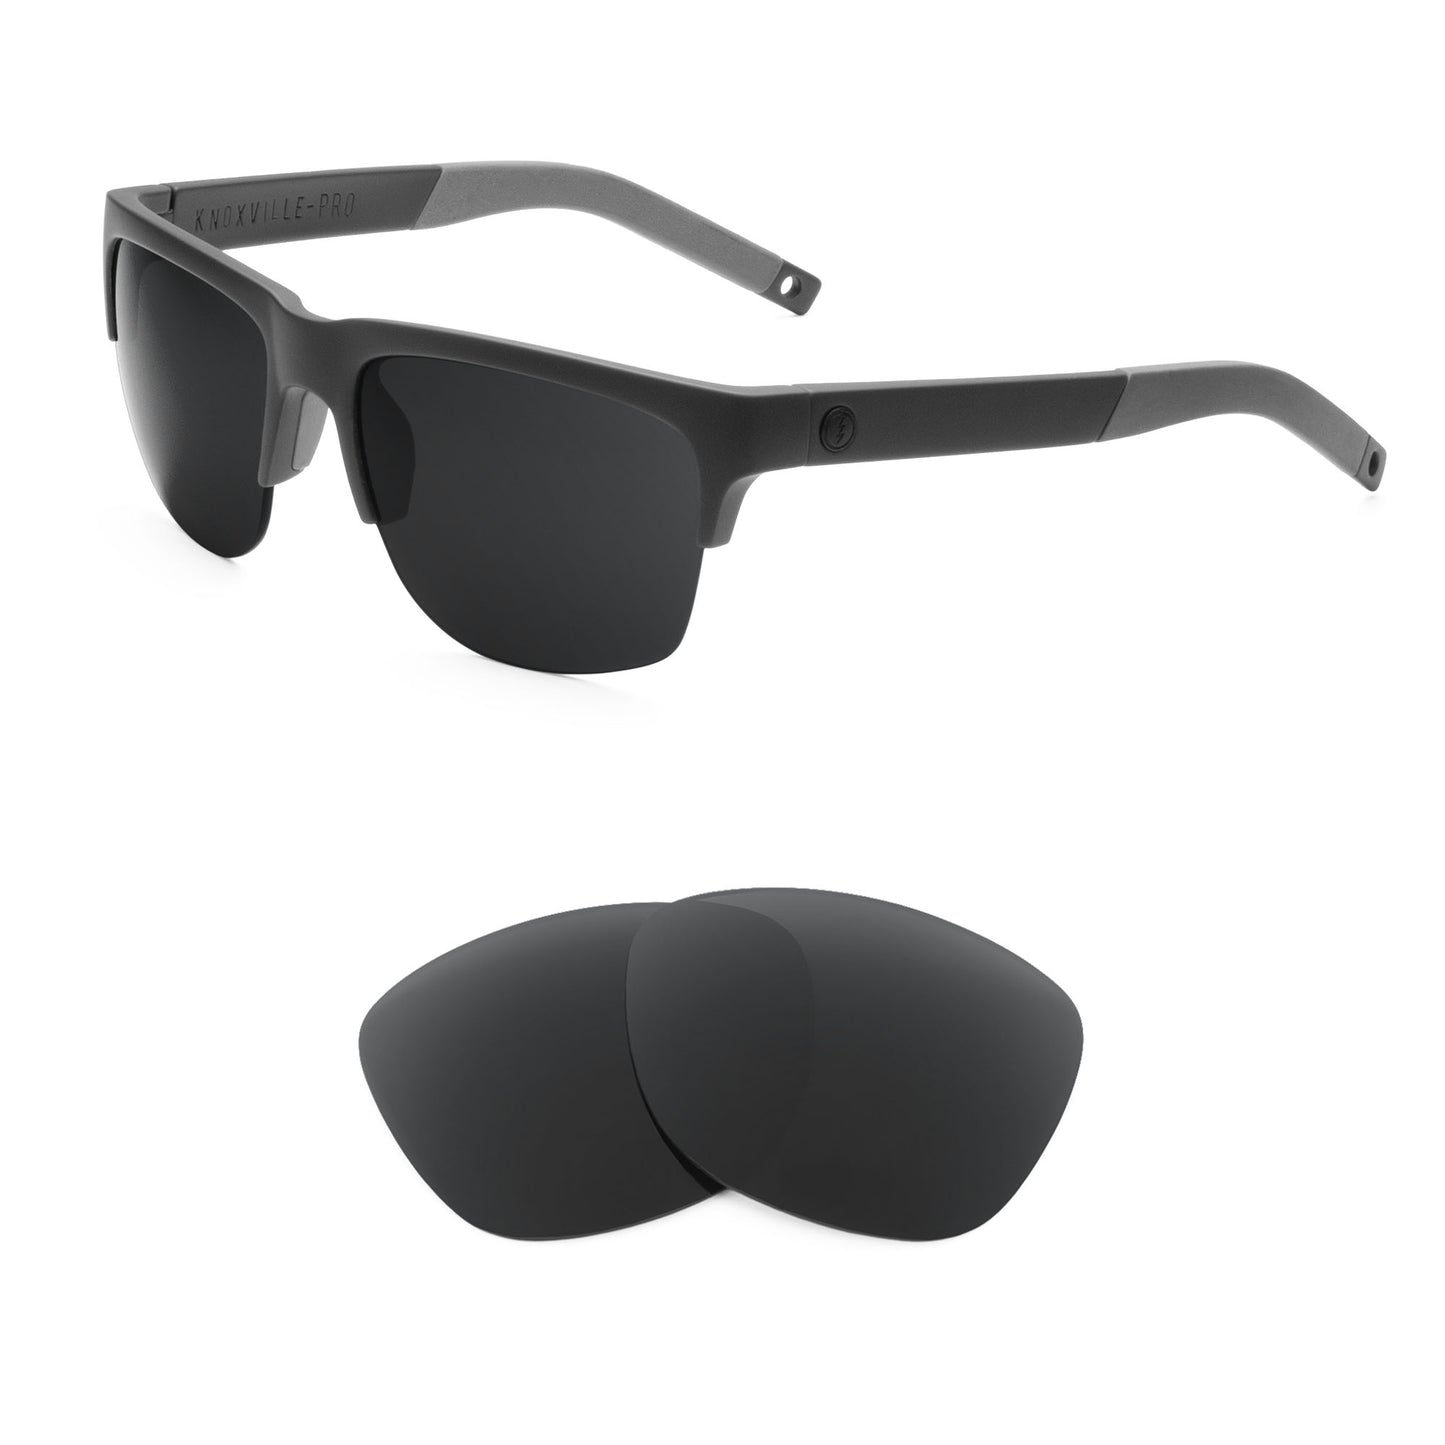 Electric Knoxville Pro sunglasses with replacement lenses